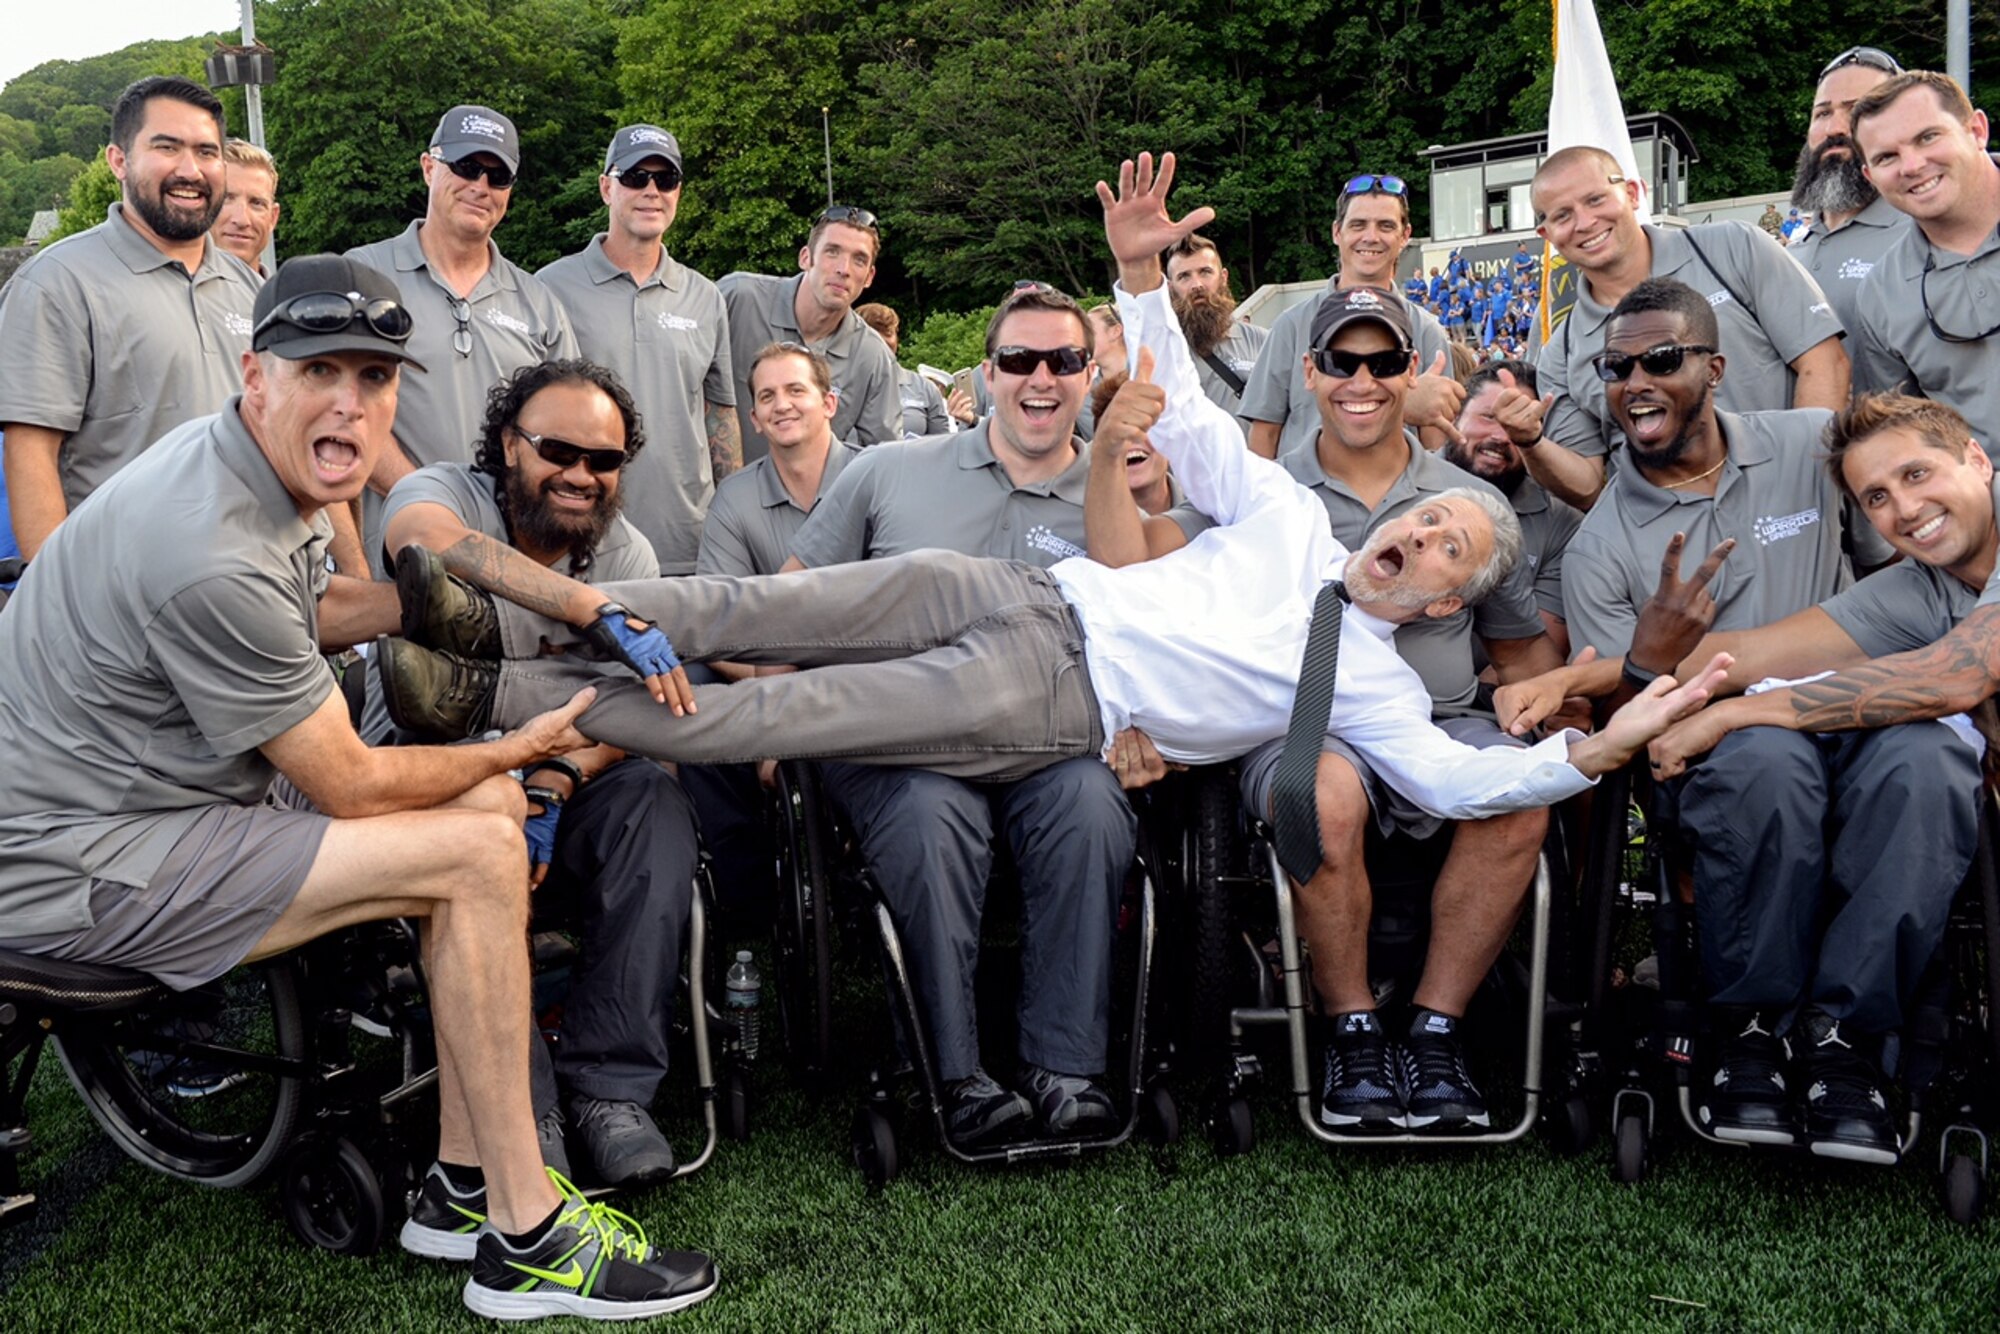 Comedian Jon Stewart, most notably of The Daily Show, poses for a photo with the U.S. Special Operations Command team during the 2016 Department of Defense Warrior Games on June 15, 2016. (Department of Defense photo/EJ Hersom)